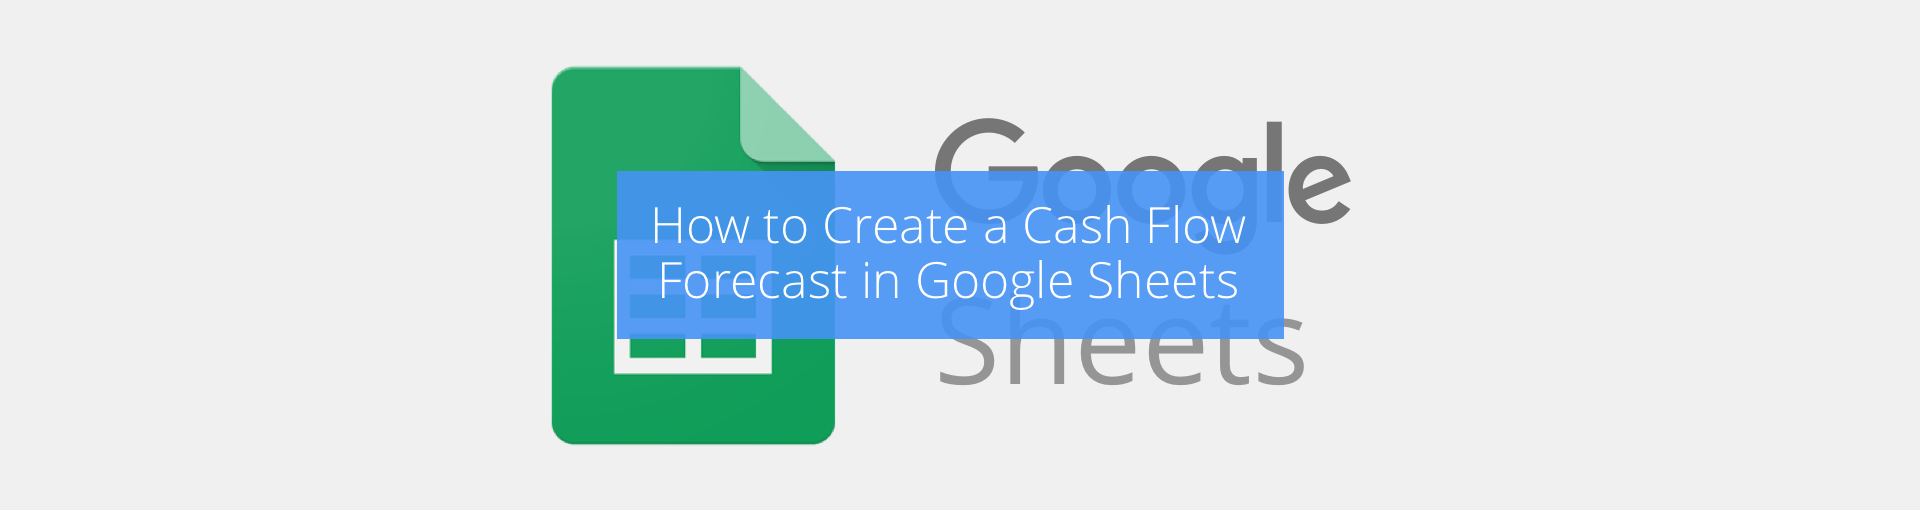 How to Create a Cash Flow Forecast in Google Sheets Featured Image